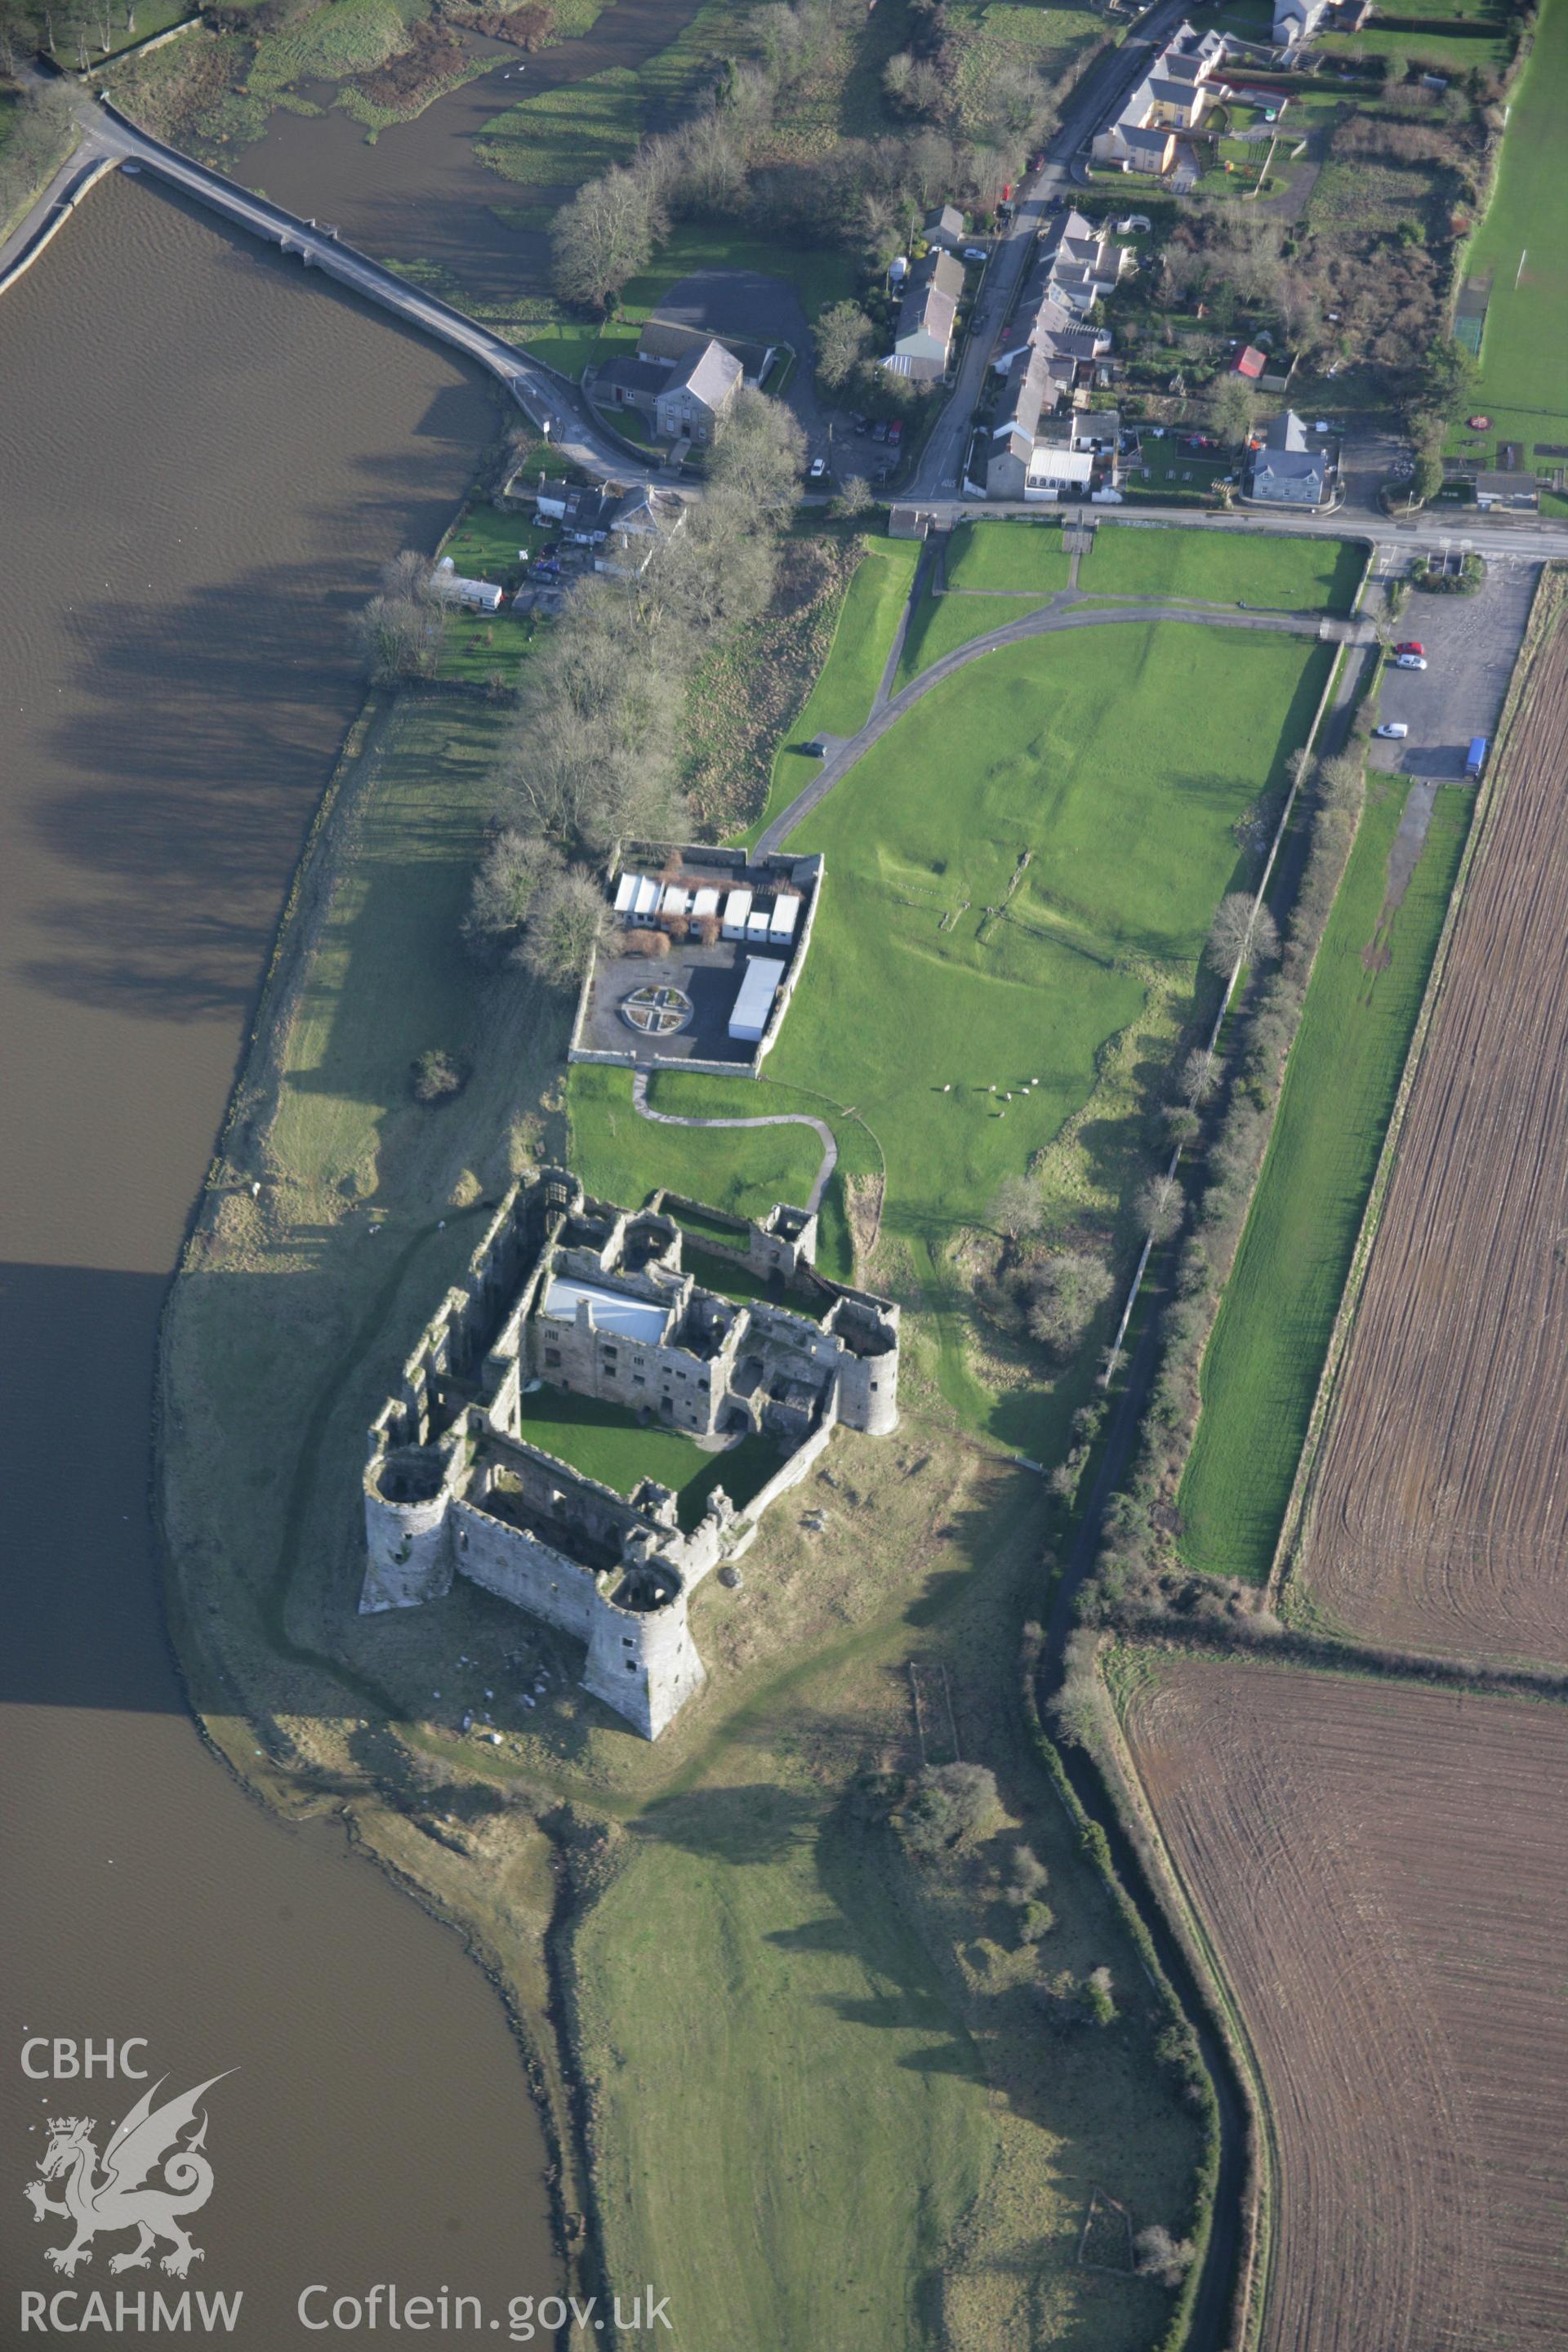 RCAHMW colour oblique aerial photograph of Carew Castle, viewed from the north-west. Taken on 11 January 2006 by Toby Driver